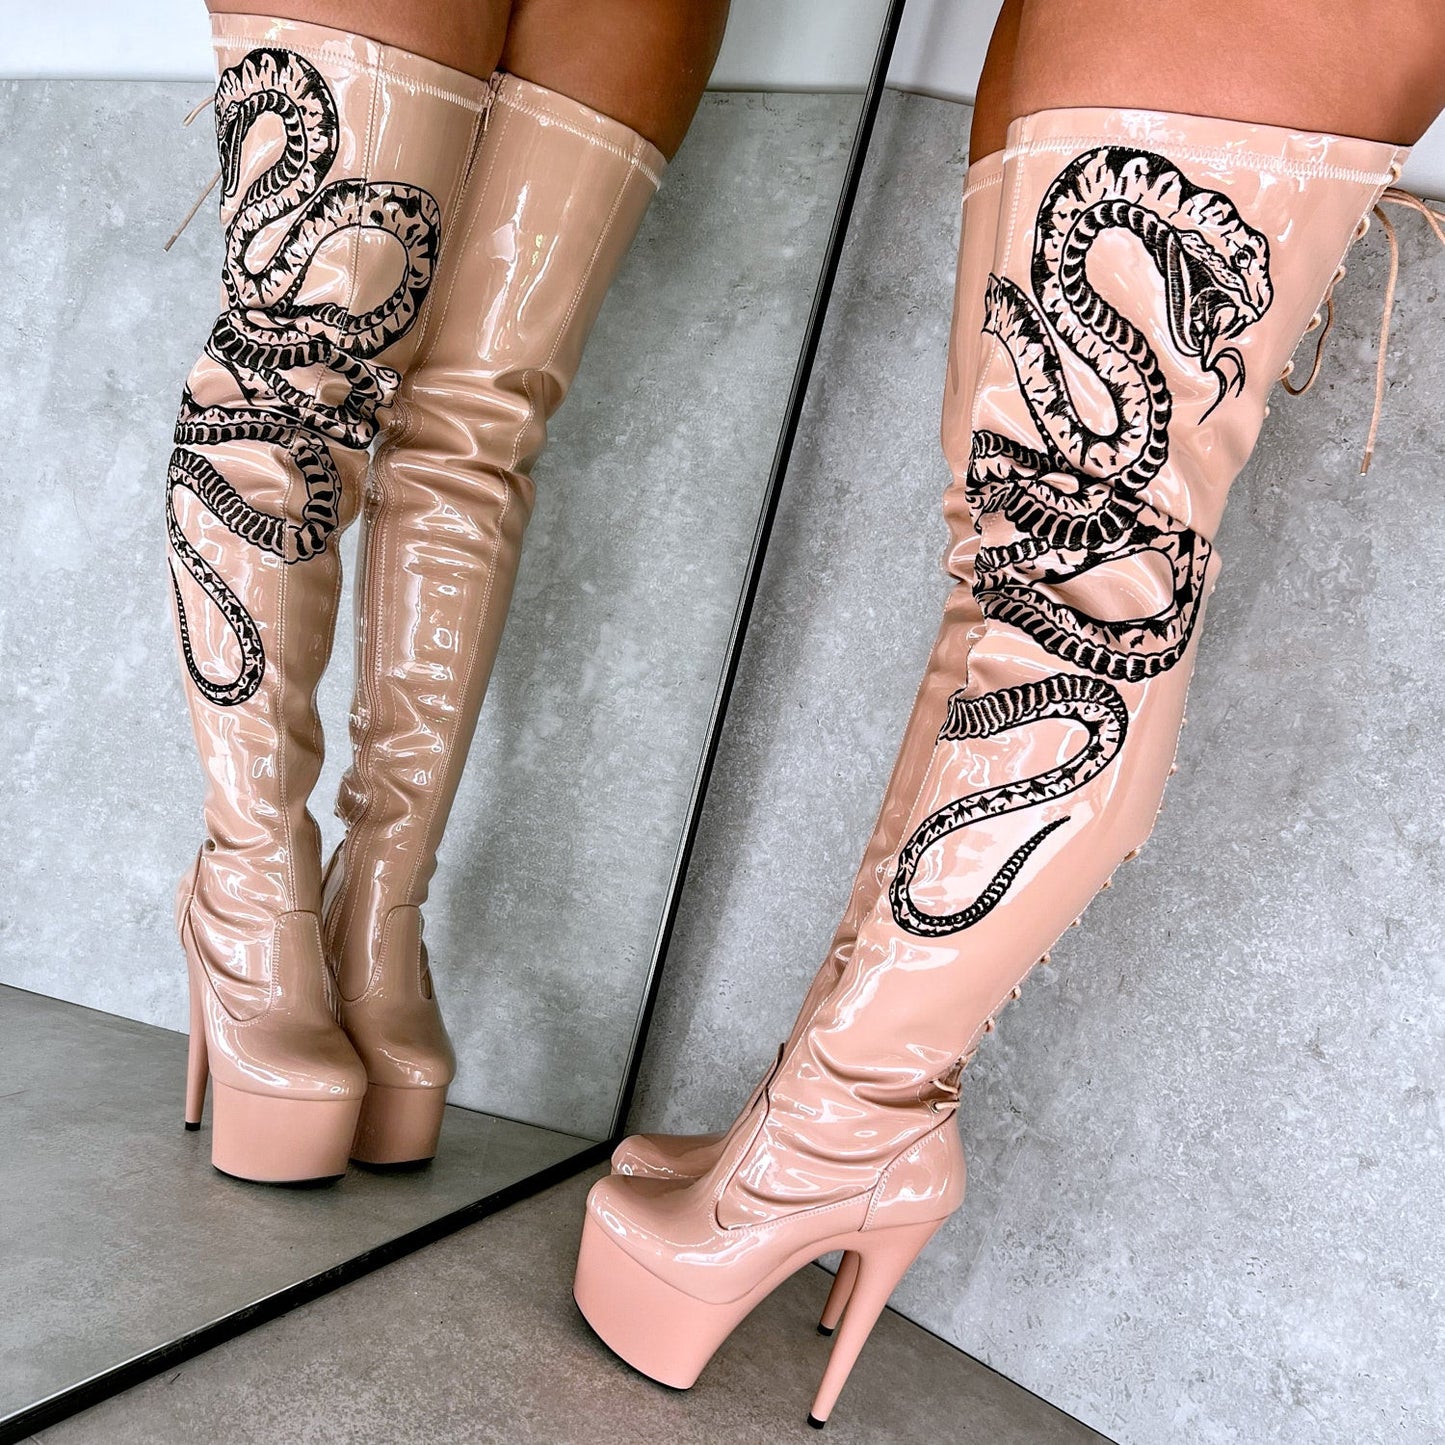 VIPER Boot Tan with Black Thicc Thigh High - 7INCH